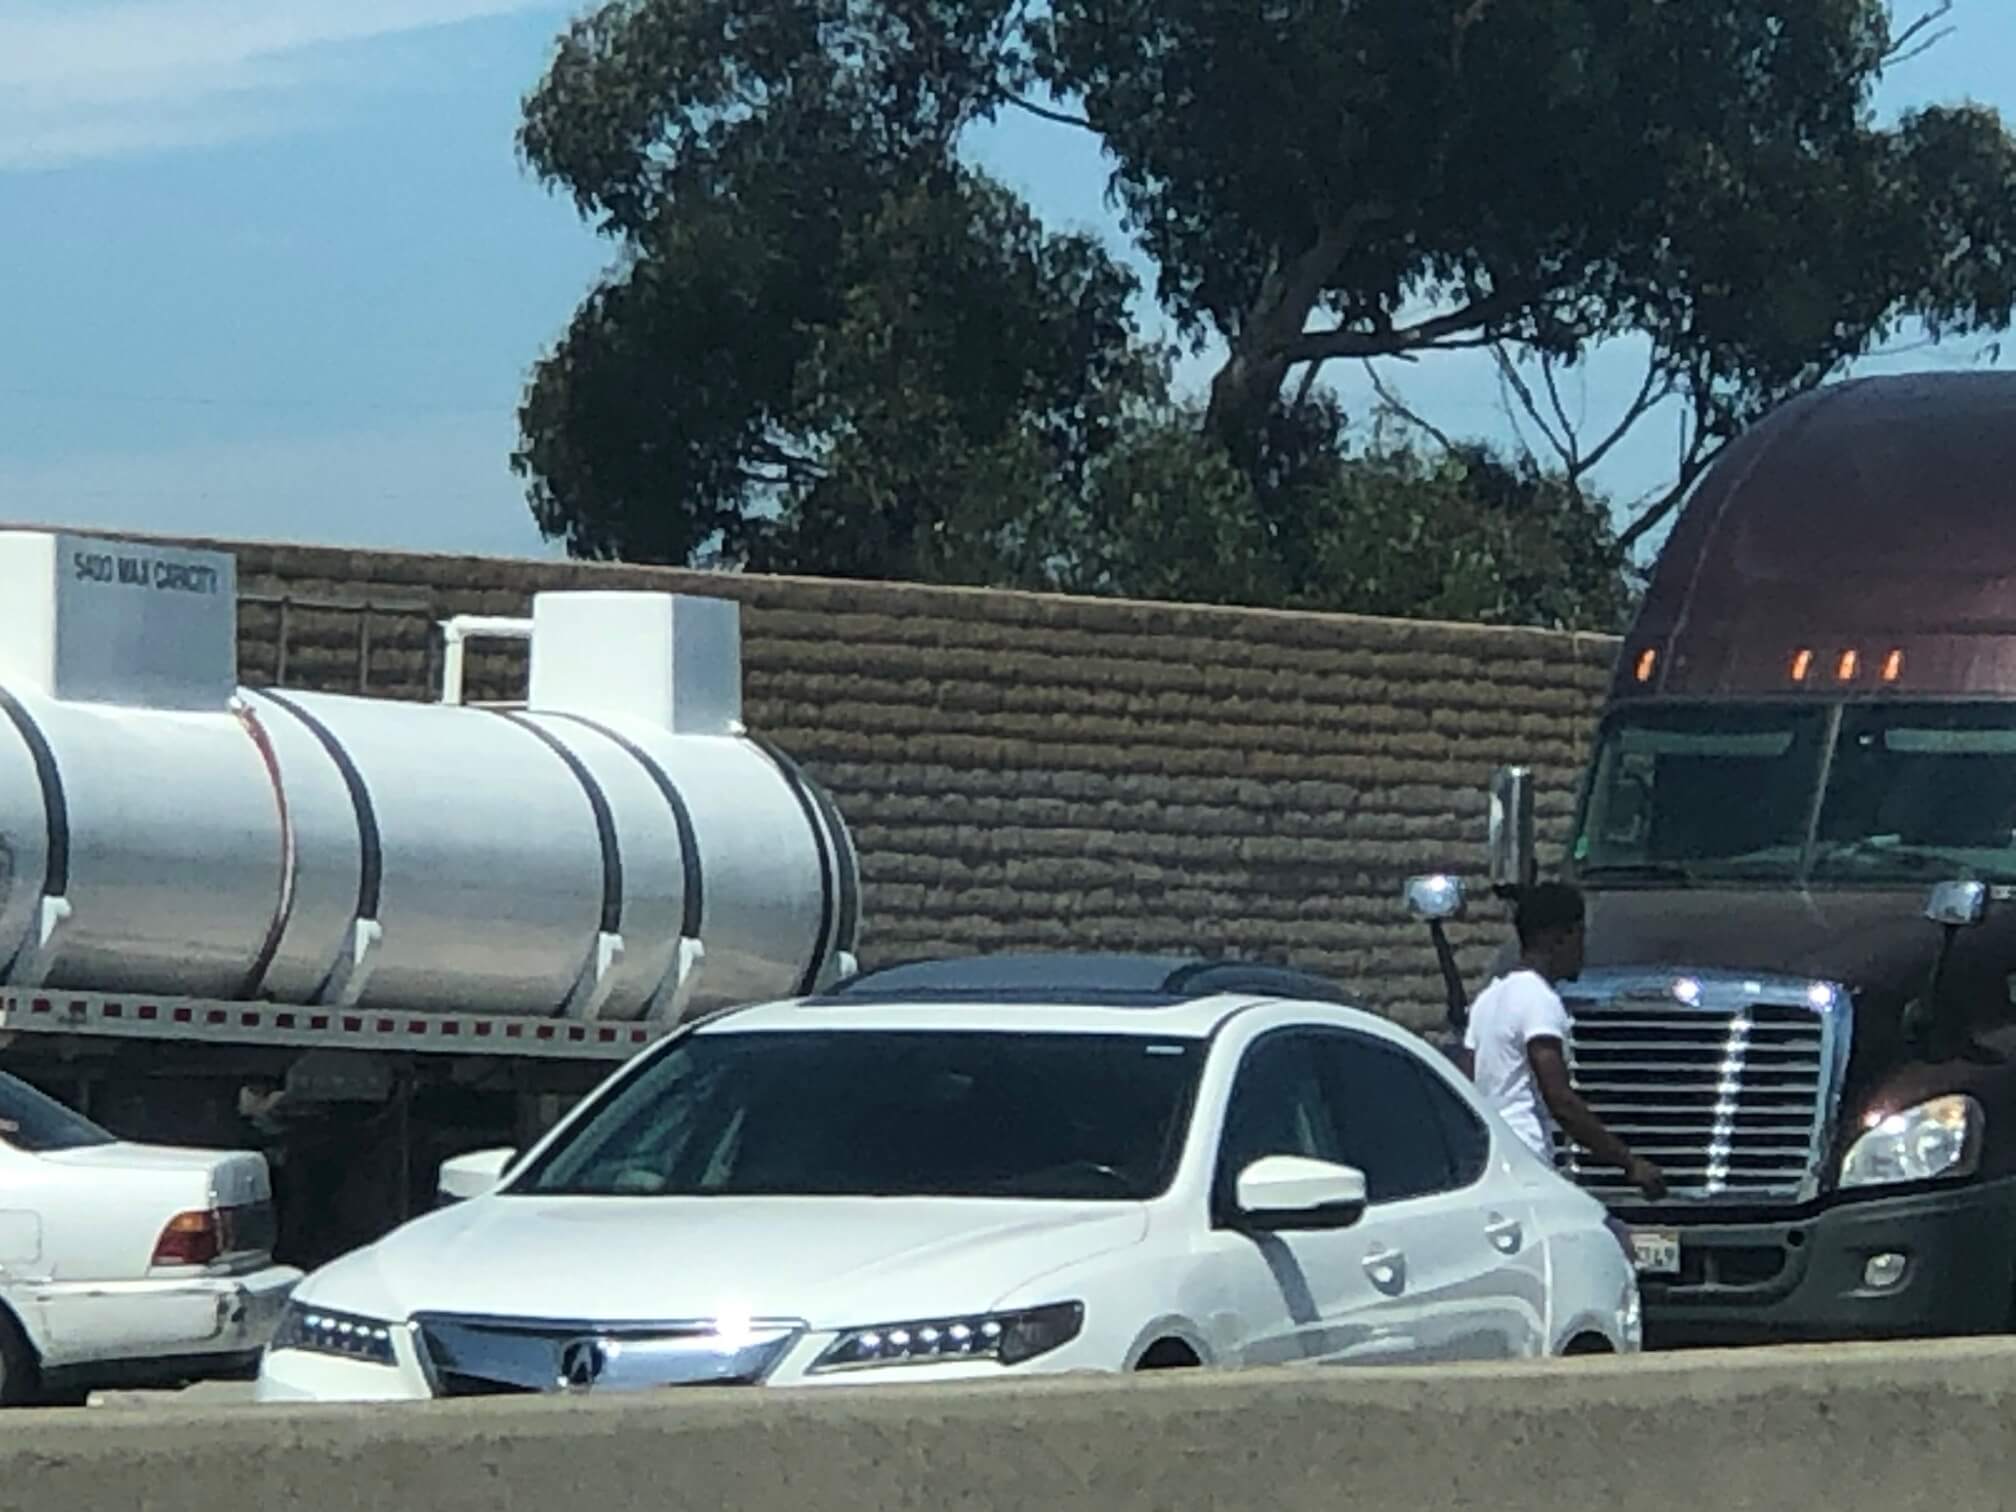 Tanker truck accident off the Long Beach 710 Freeway